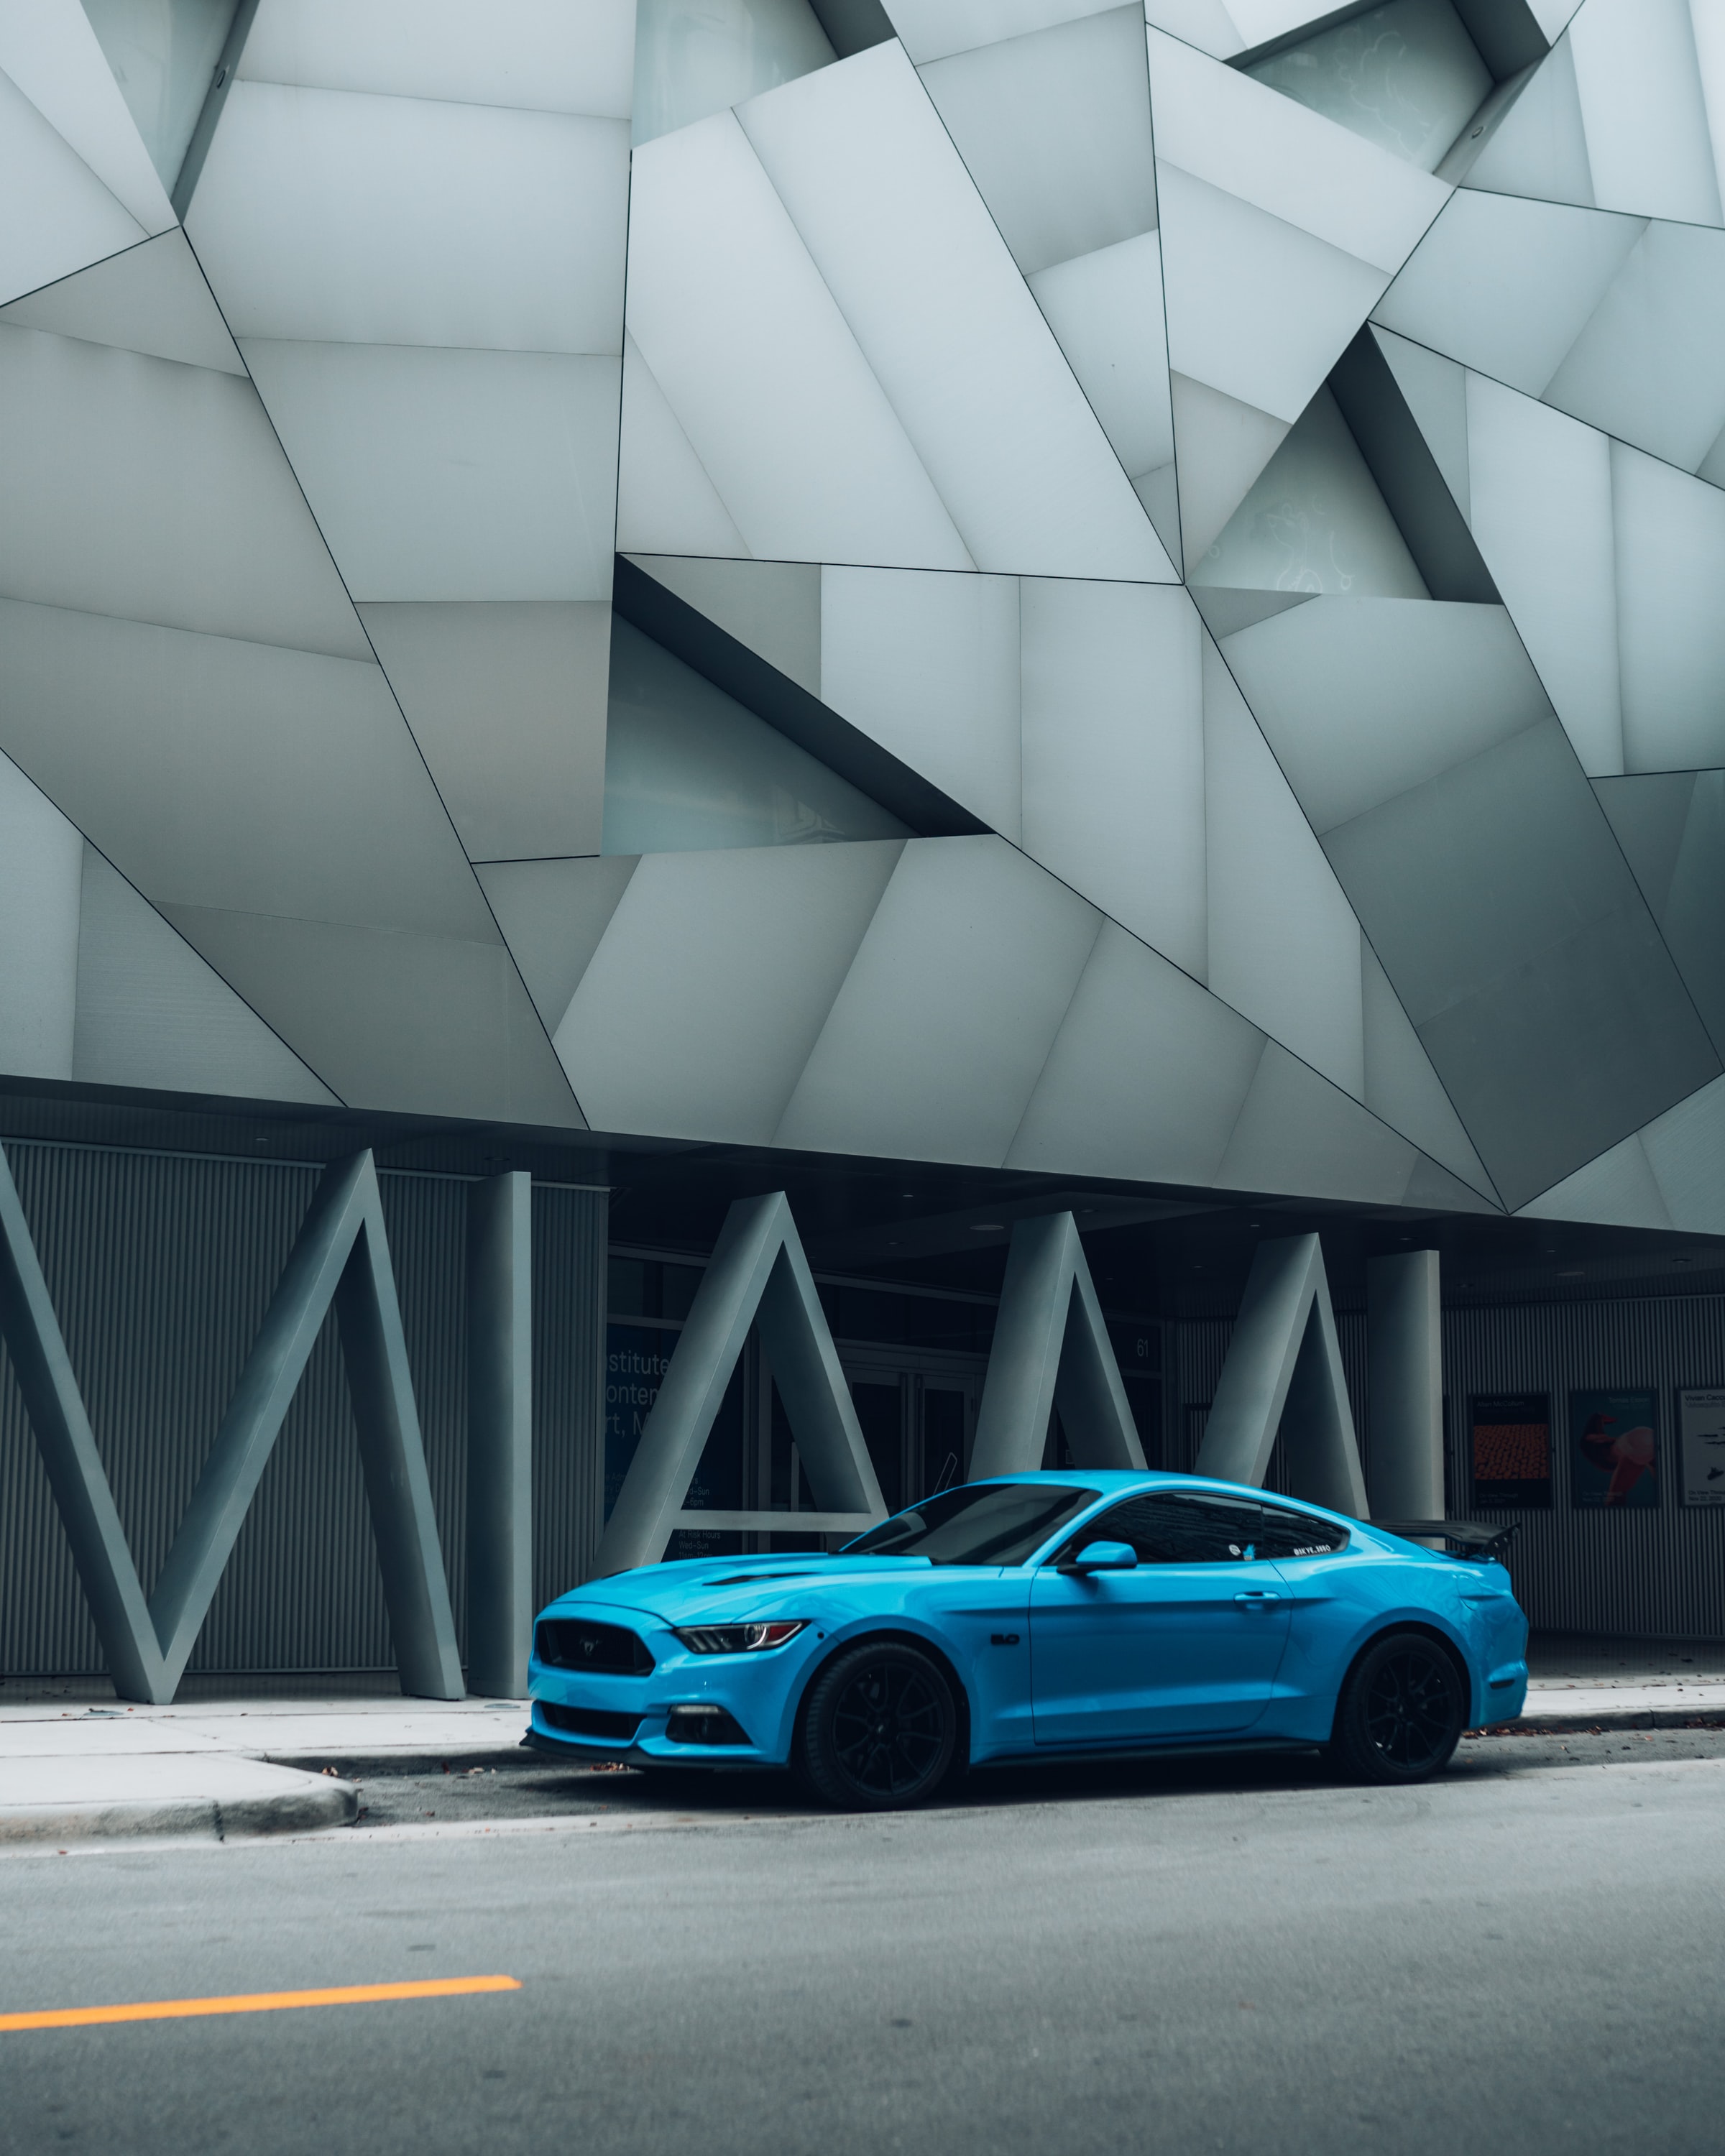 152803 free download Blue wallpapers for phone, road, sports car, car, sports Blue images and screensavers for mobile